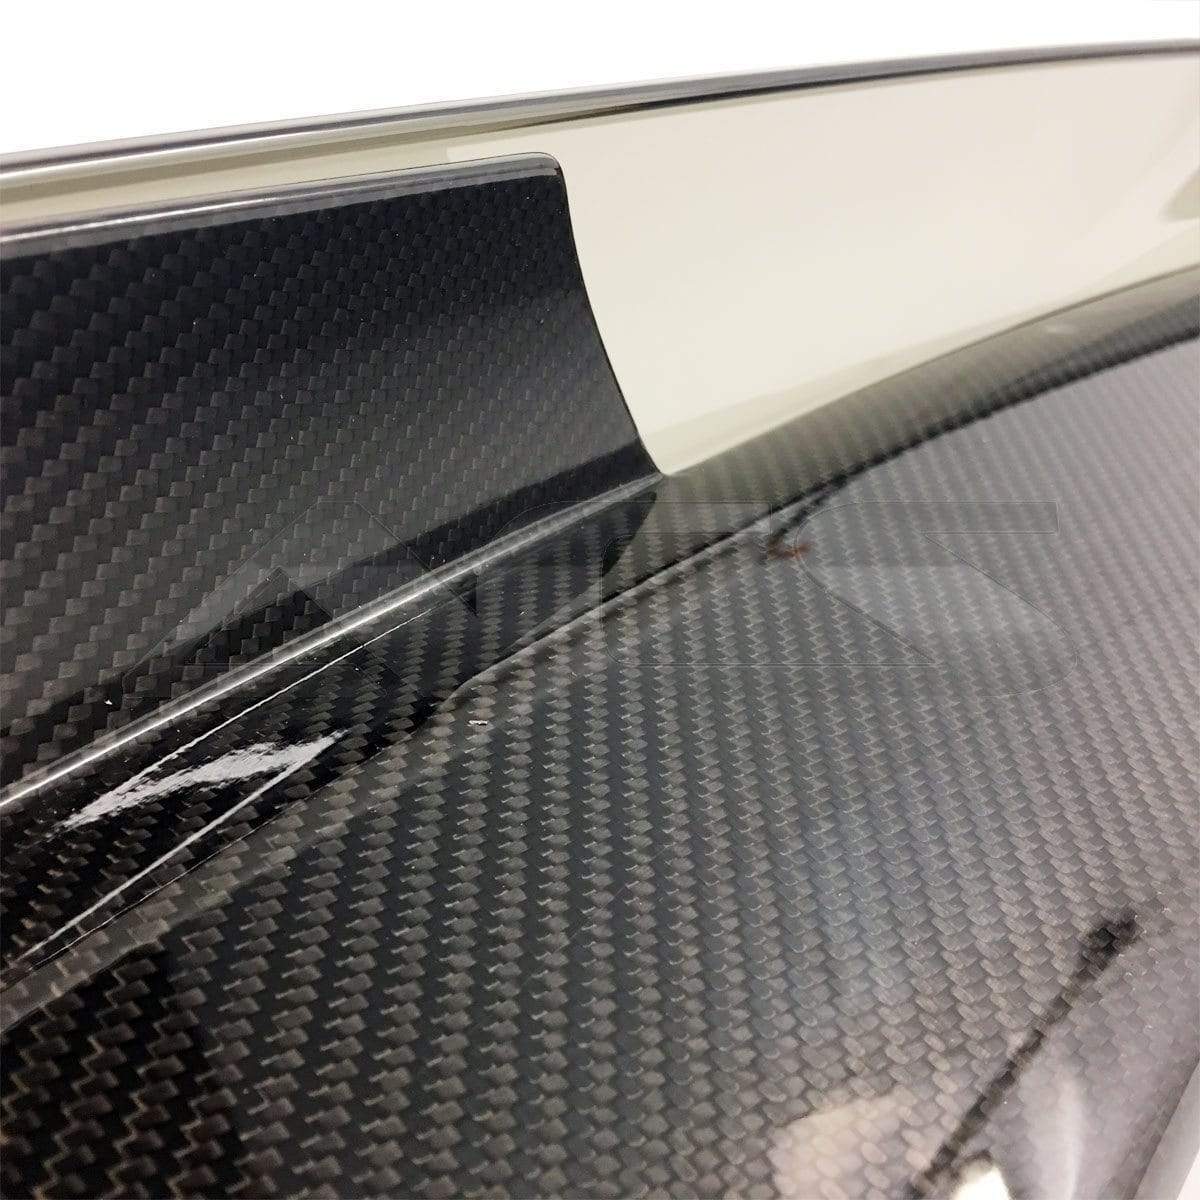 Carbon fiber Z06 rear spoiler for C7 Corvette with Stage 2/3 compatibility. Lightweight, strong, and matches existing carbon fiber trim. SKU: 45-8-025.